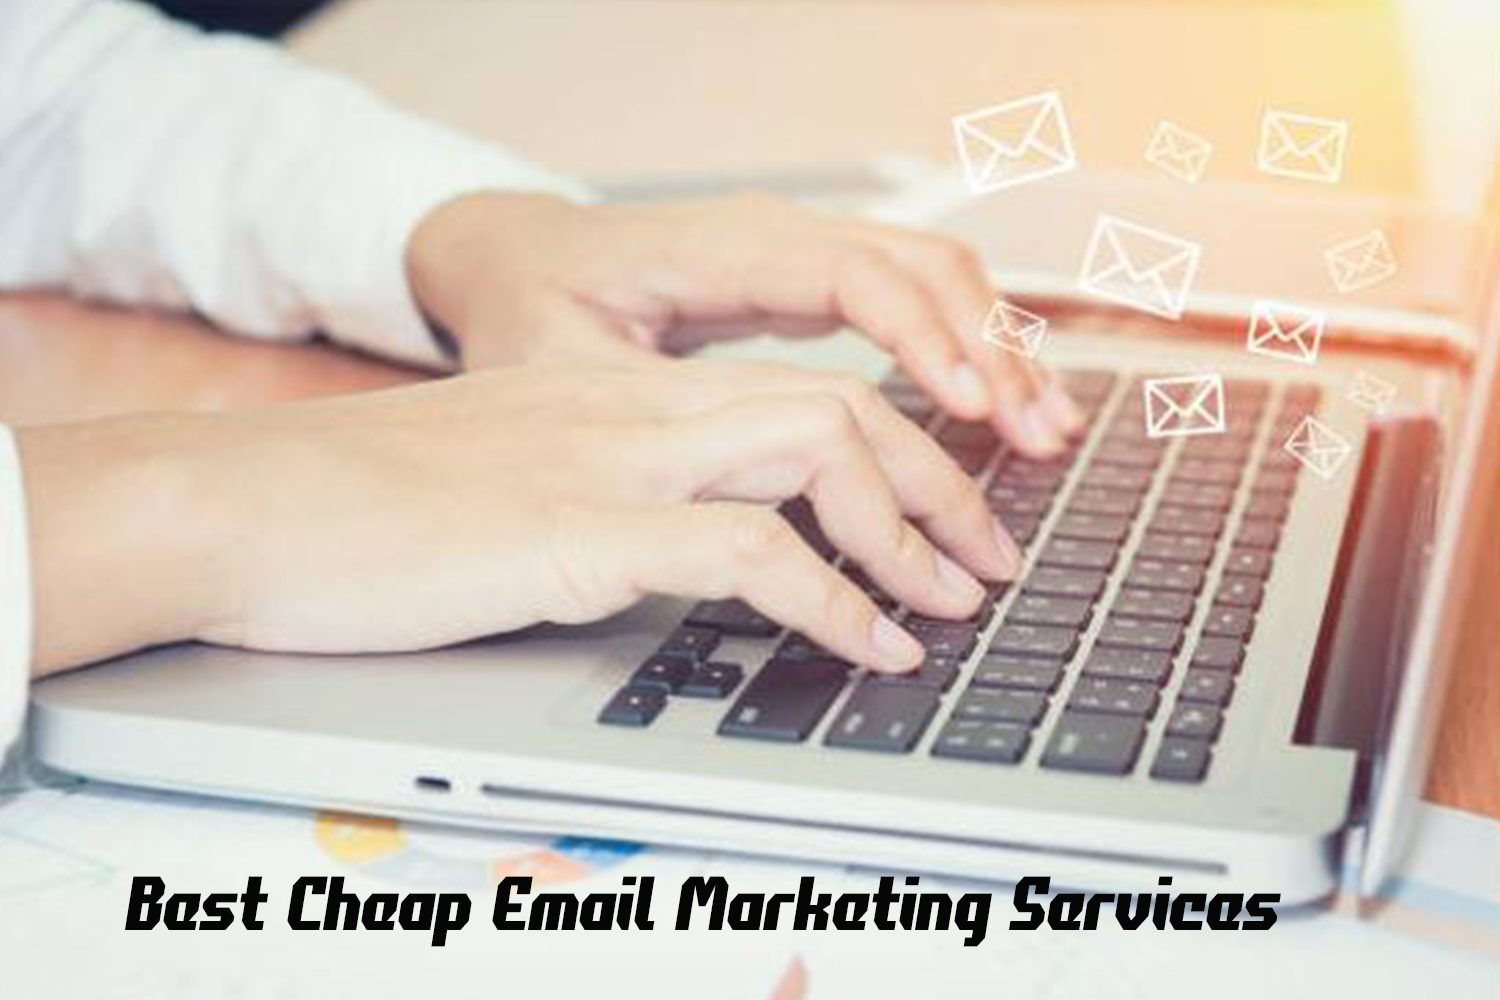 10 Best Cheap Email Marketing Services